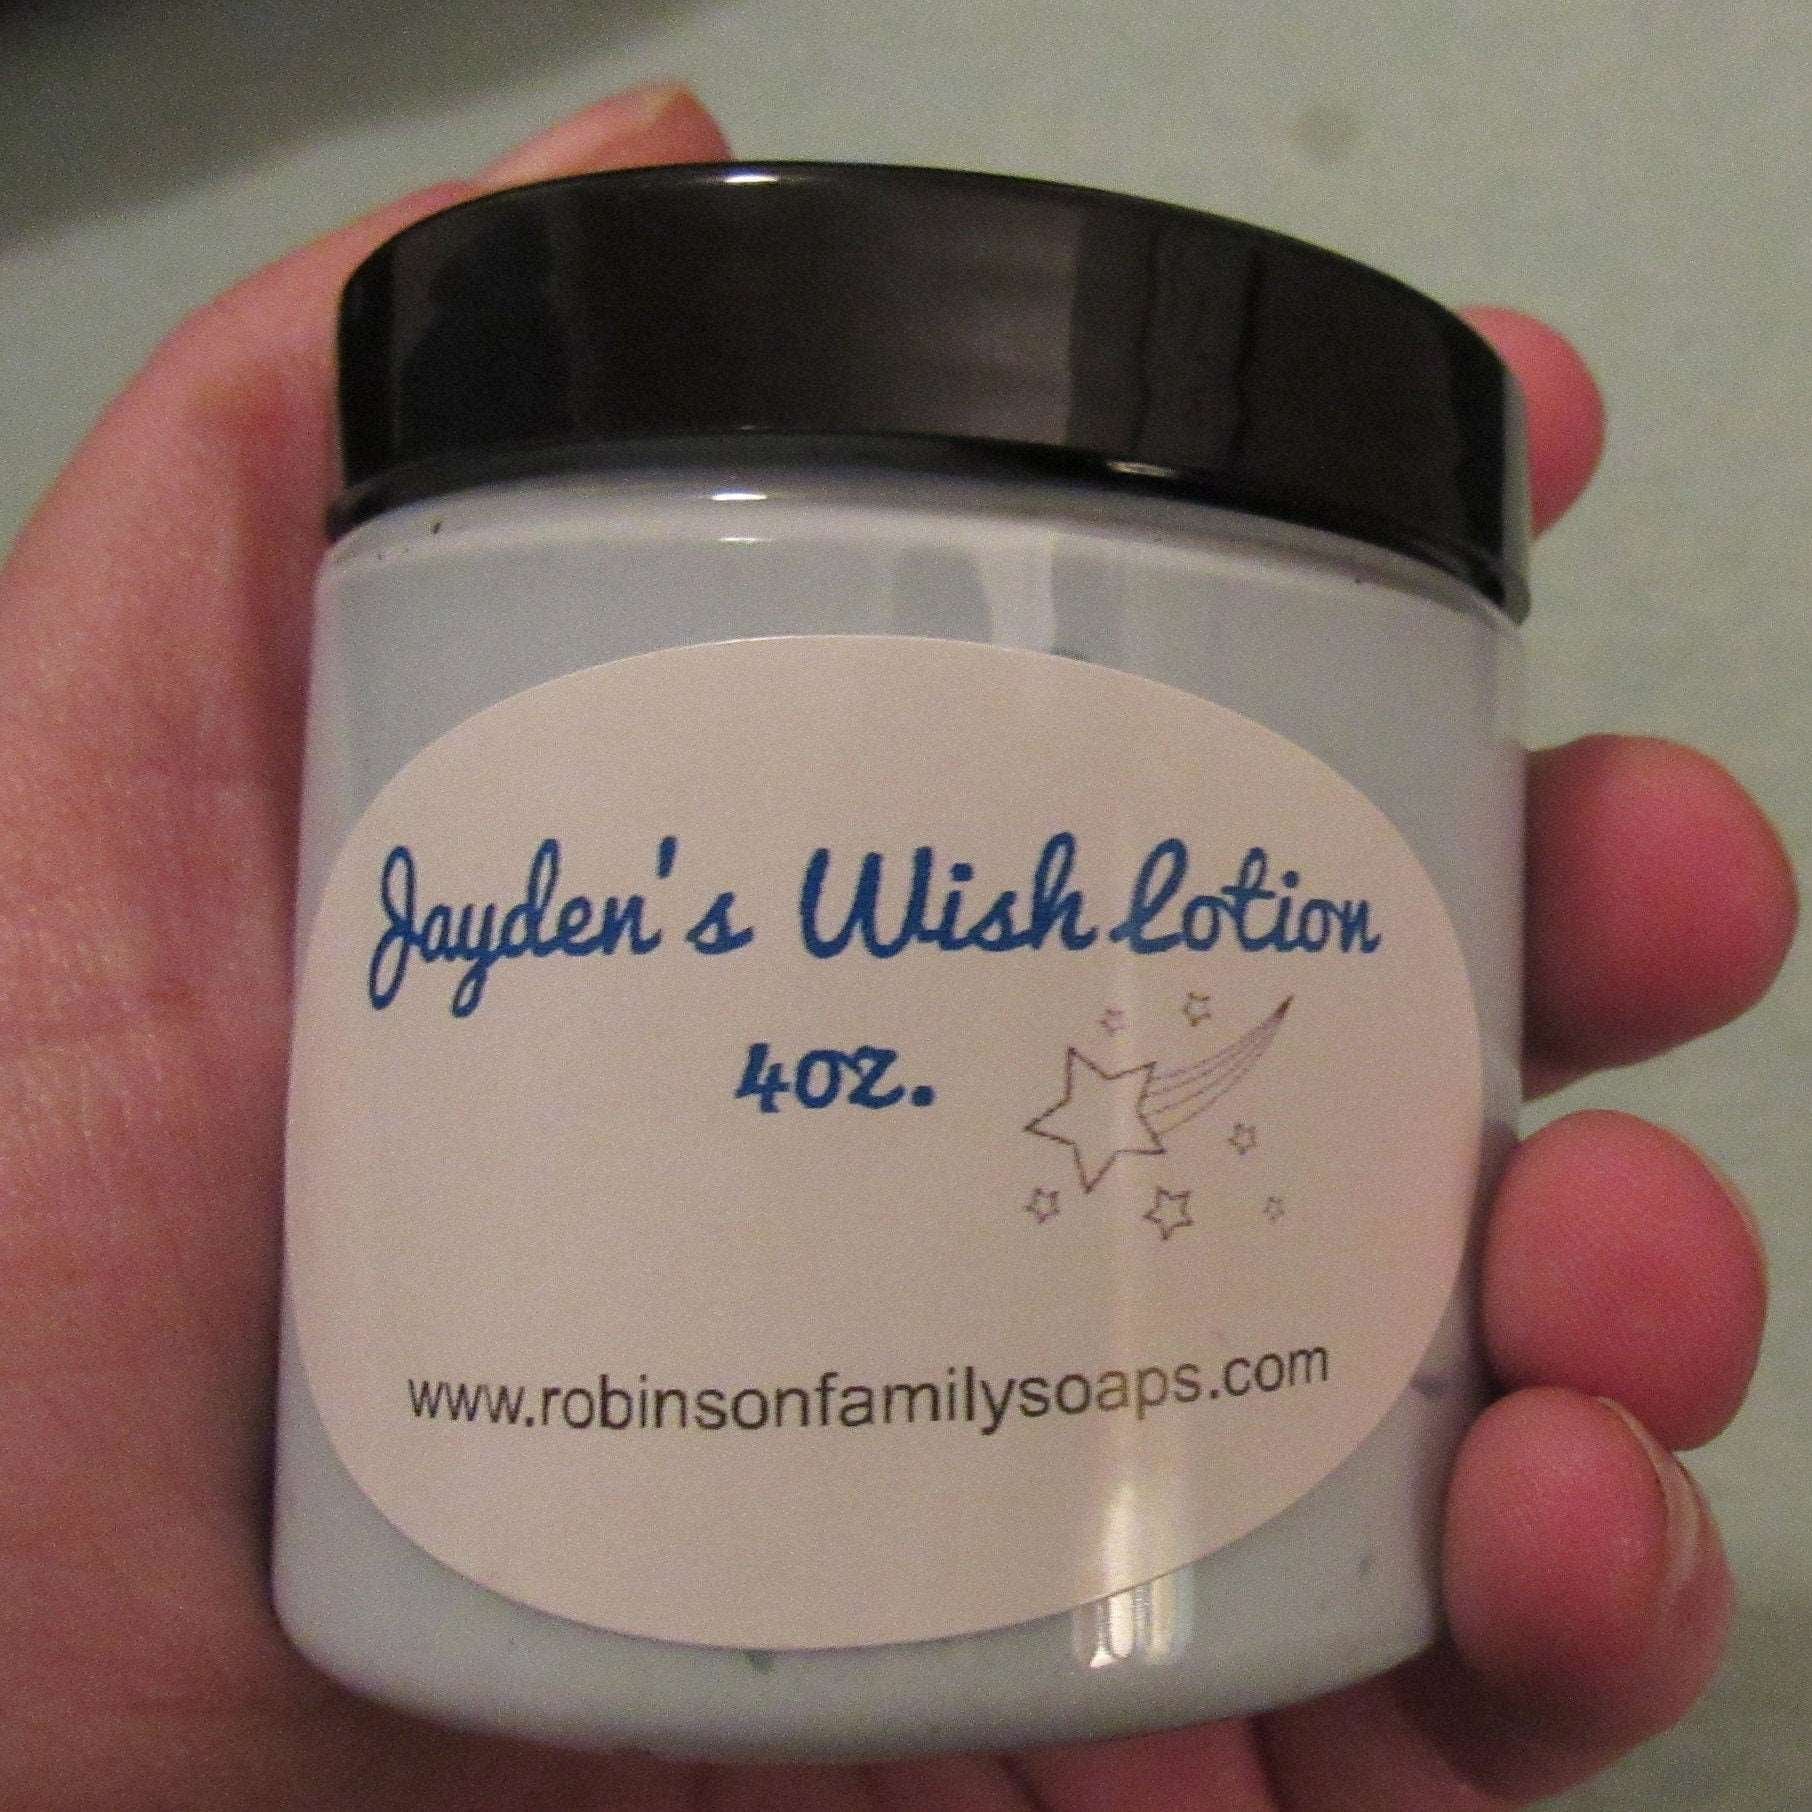 Jayden's Wish Lotion for Sensitive Skin & Skin Aliments Scented & Fragrance Free Lotion & Moisturizer Robinson Family Soaps   